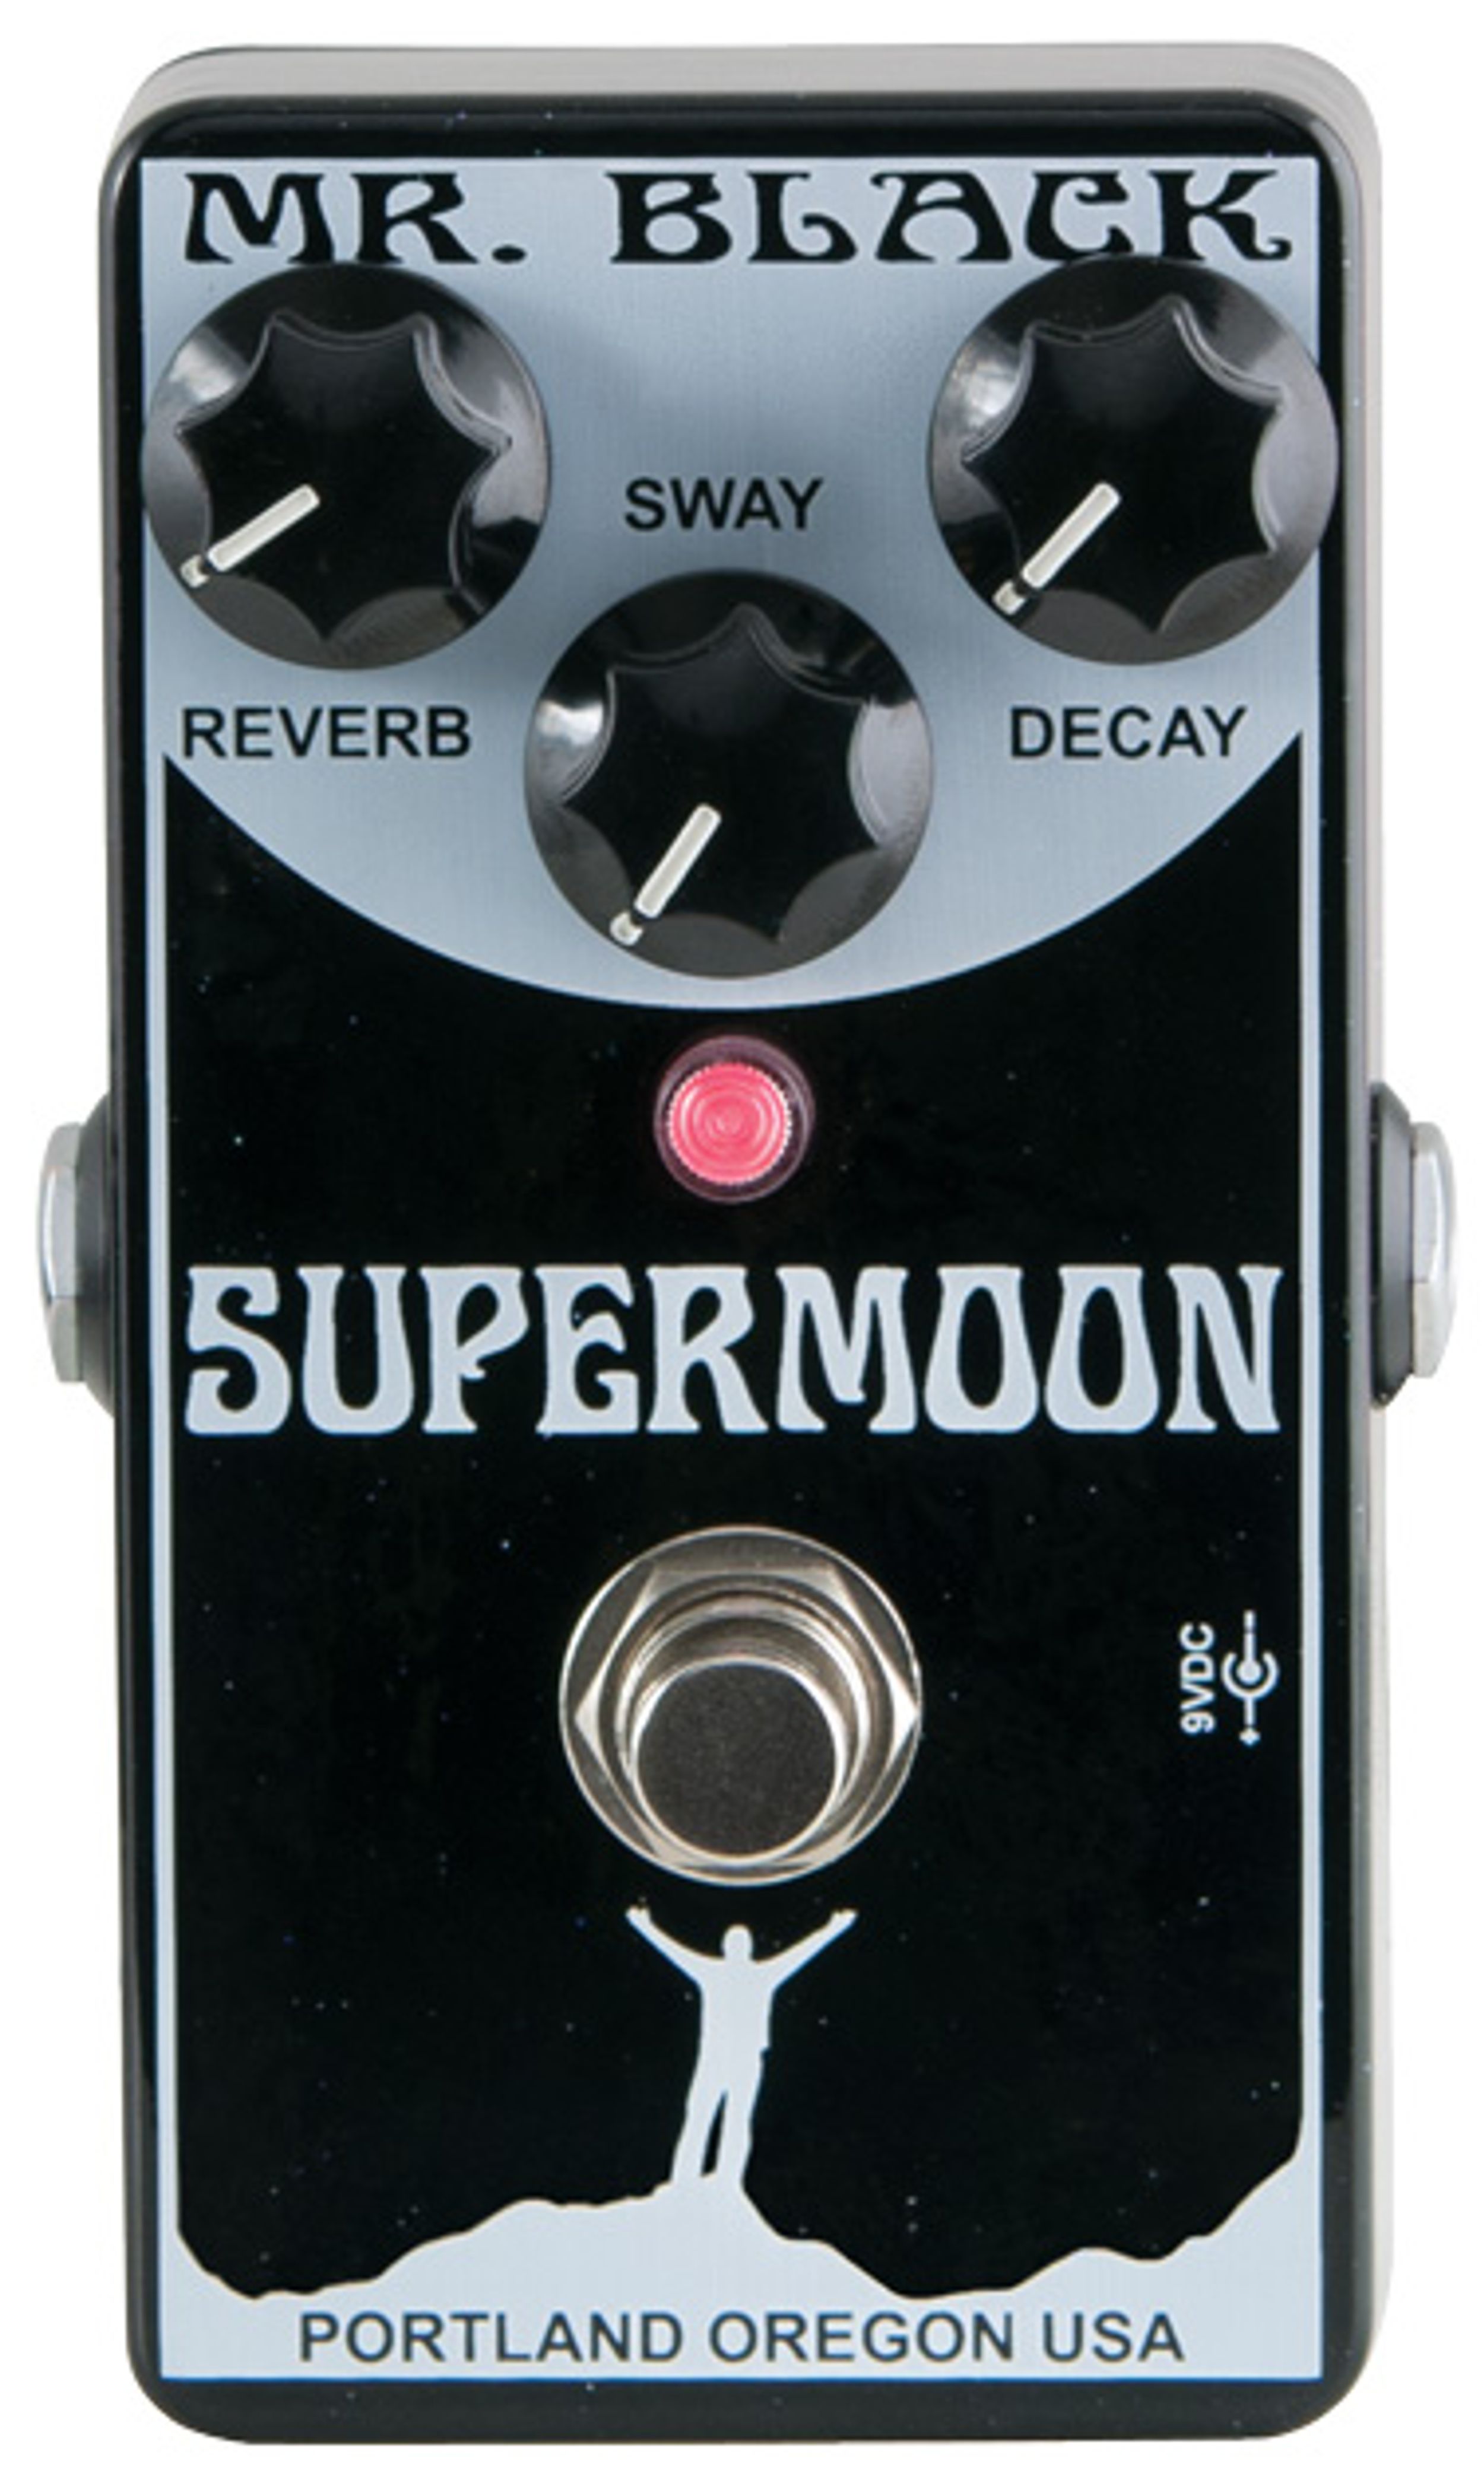 Mr. Black SuperMoon Reverb Review